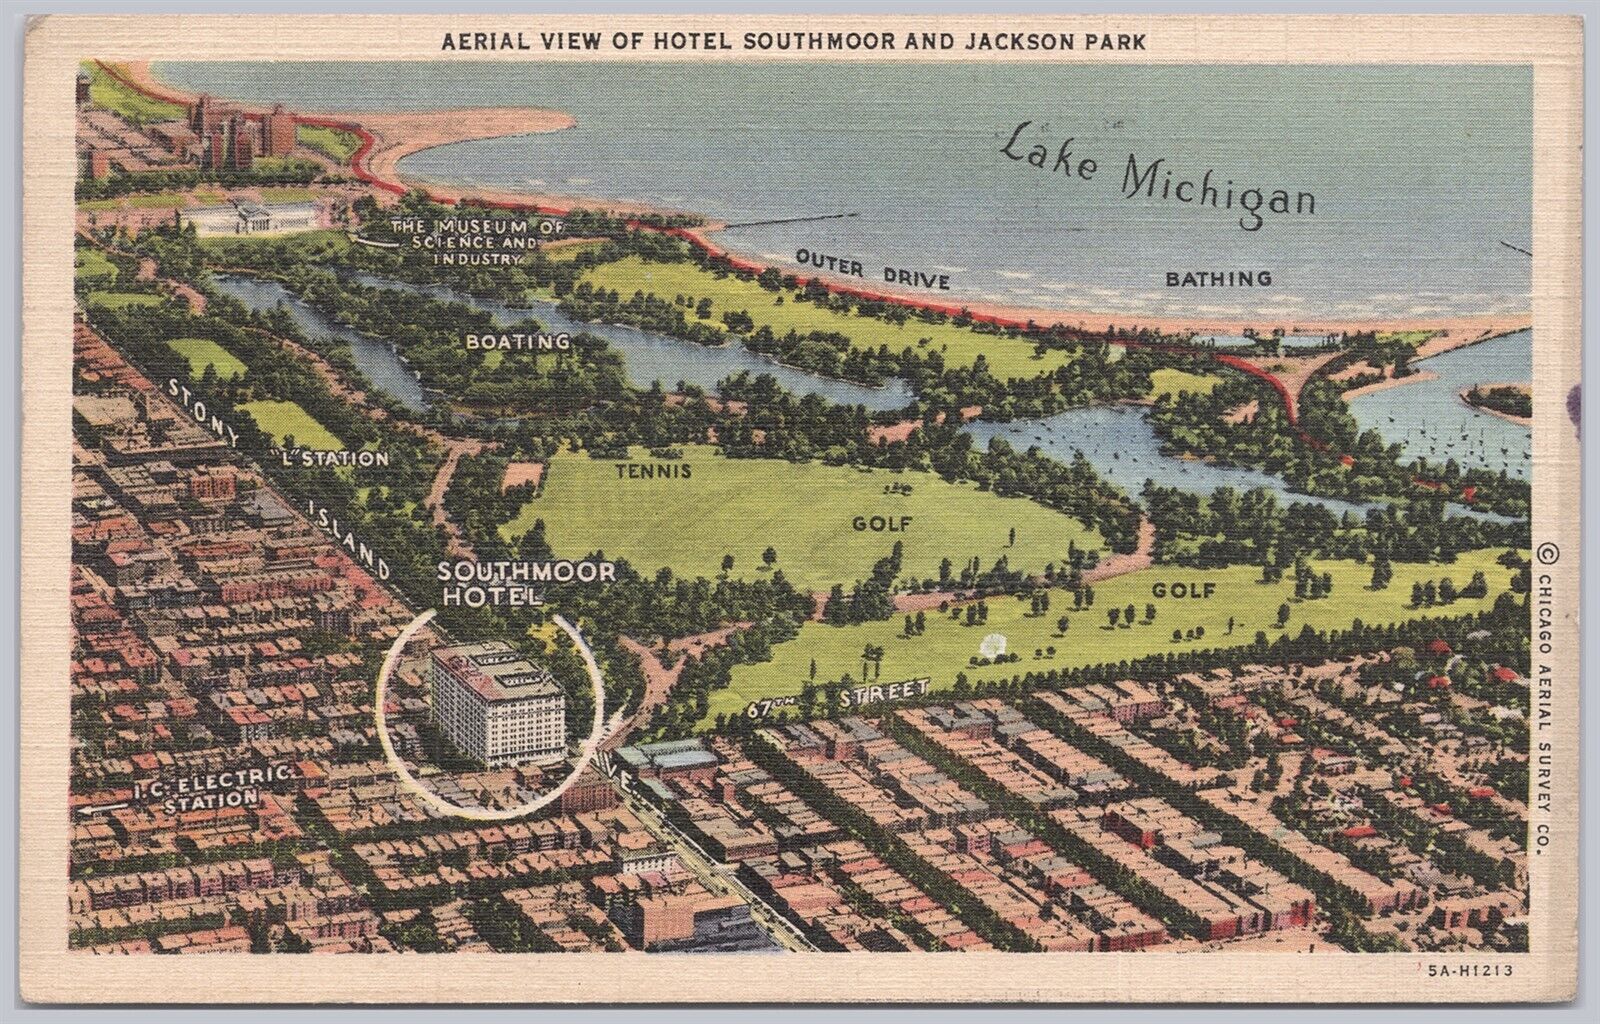 Chicago, Ill., Aerial View of Hotel Southmoor and Jackson Park - 1946